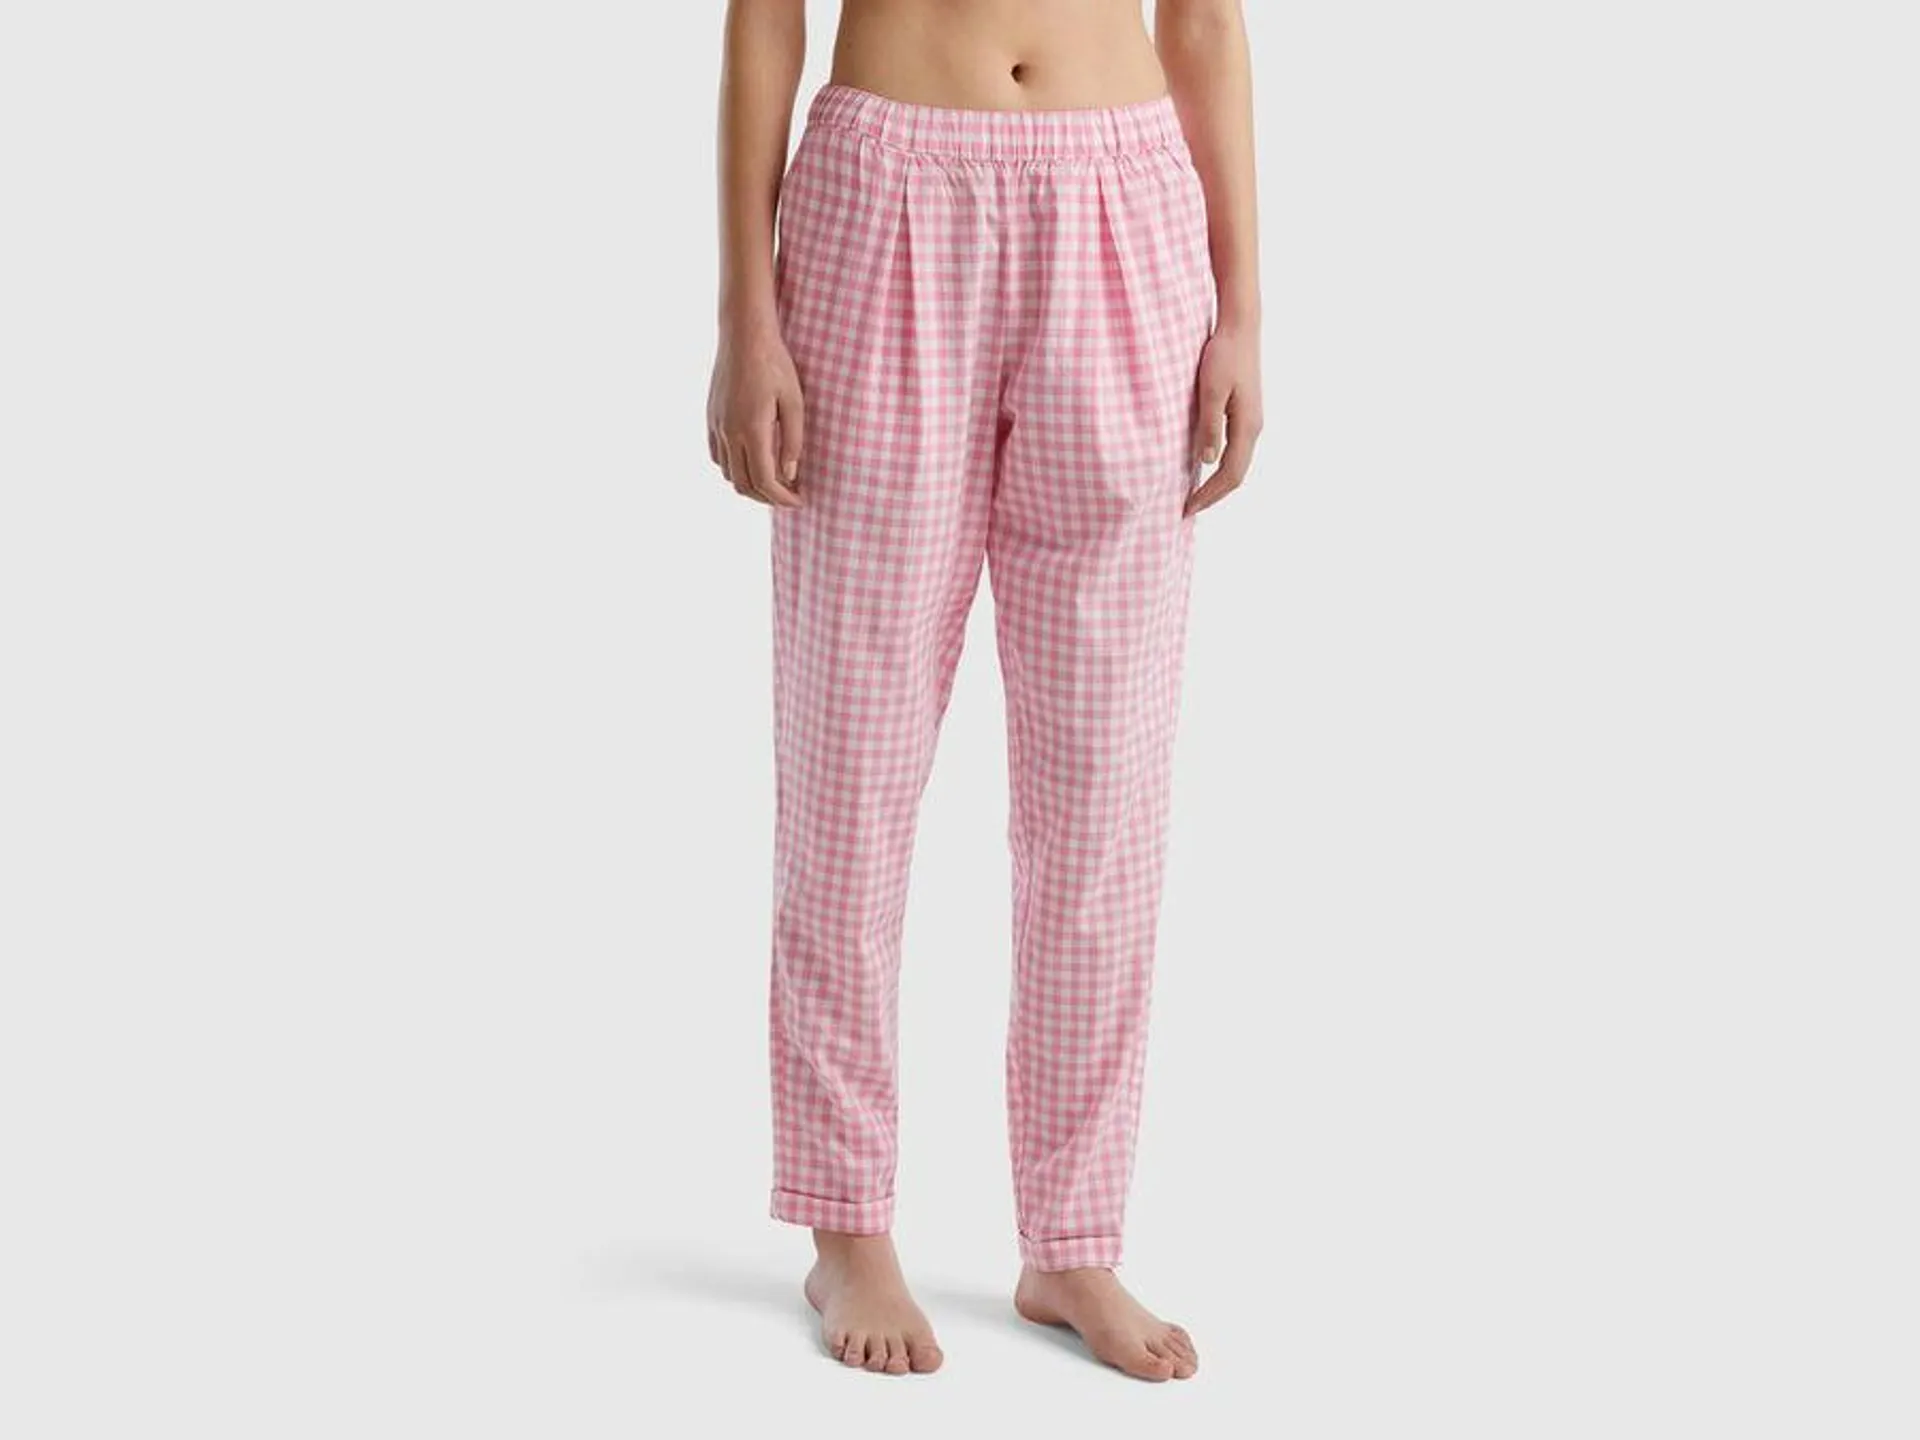 Trousers with Vichy check pattern